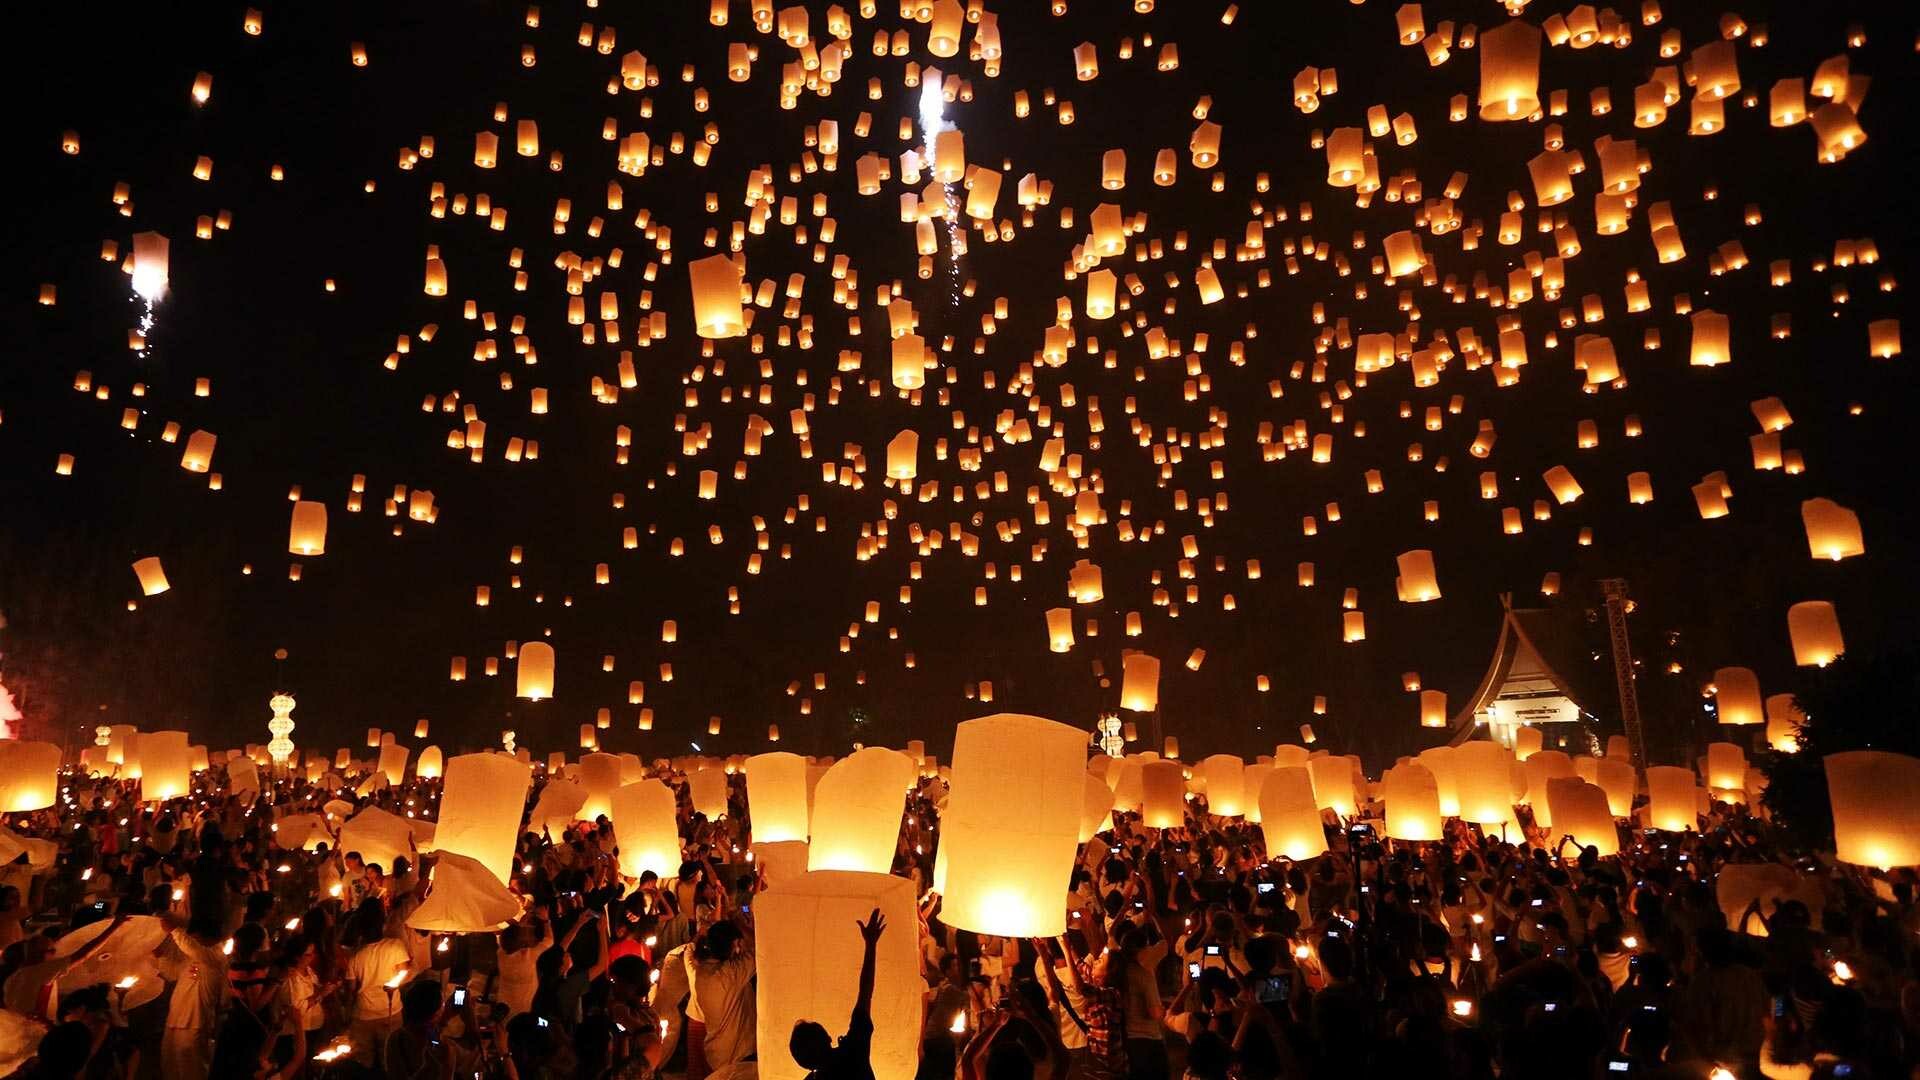 Lantern Festival: An ancient celebratory event, existing as far back as 4,000 years ago. 1920x1080 Full HD Background.